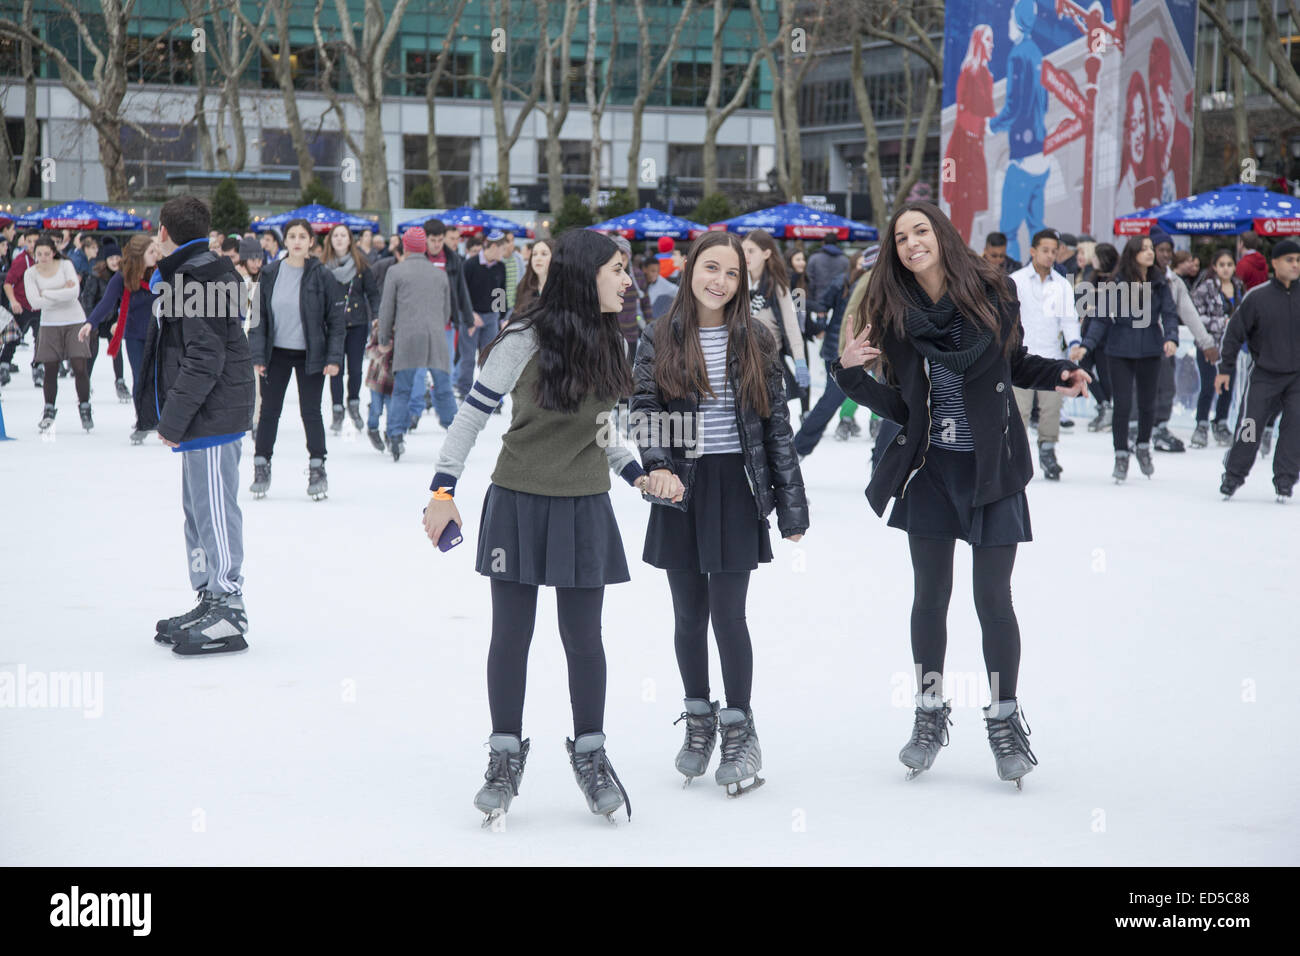 People enjoy the holiday season ice skating at Bryant Park in midtown Manhattan, NYC. Stock Photo